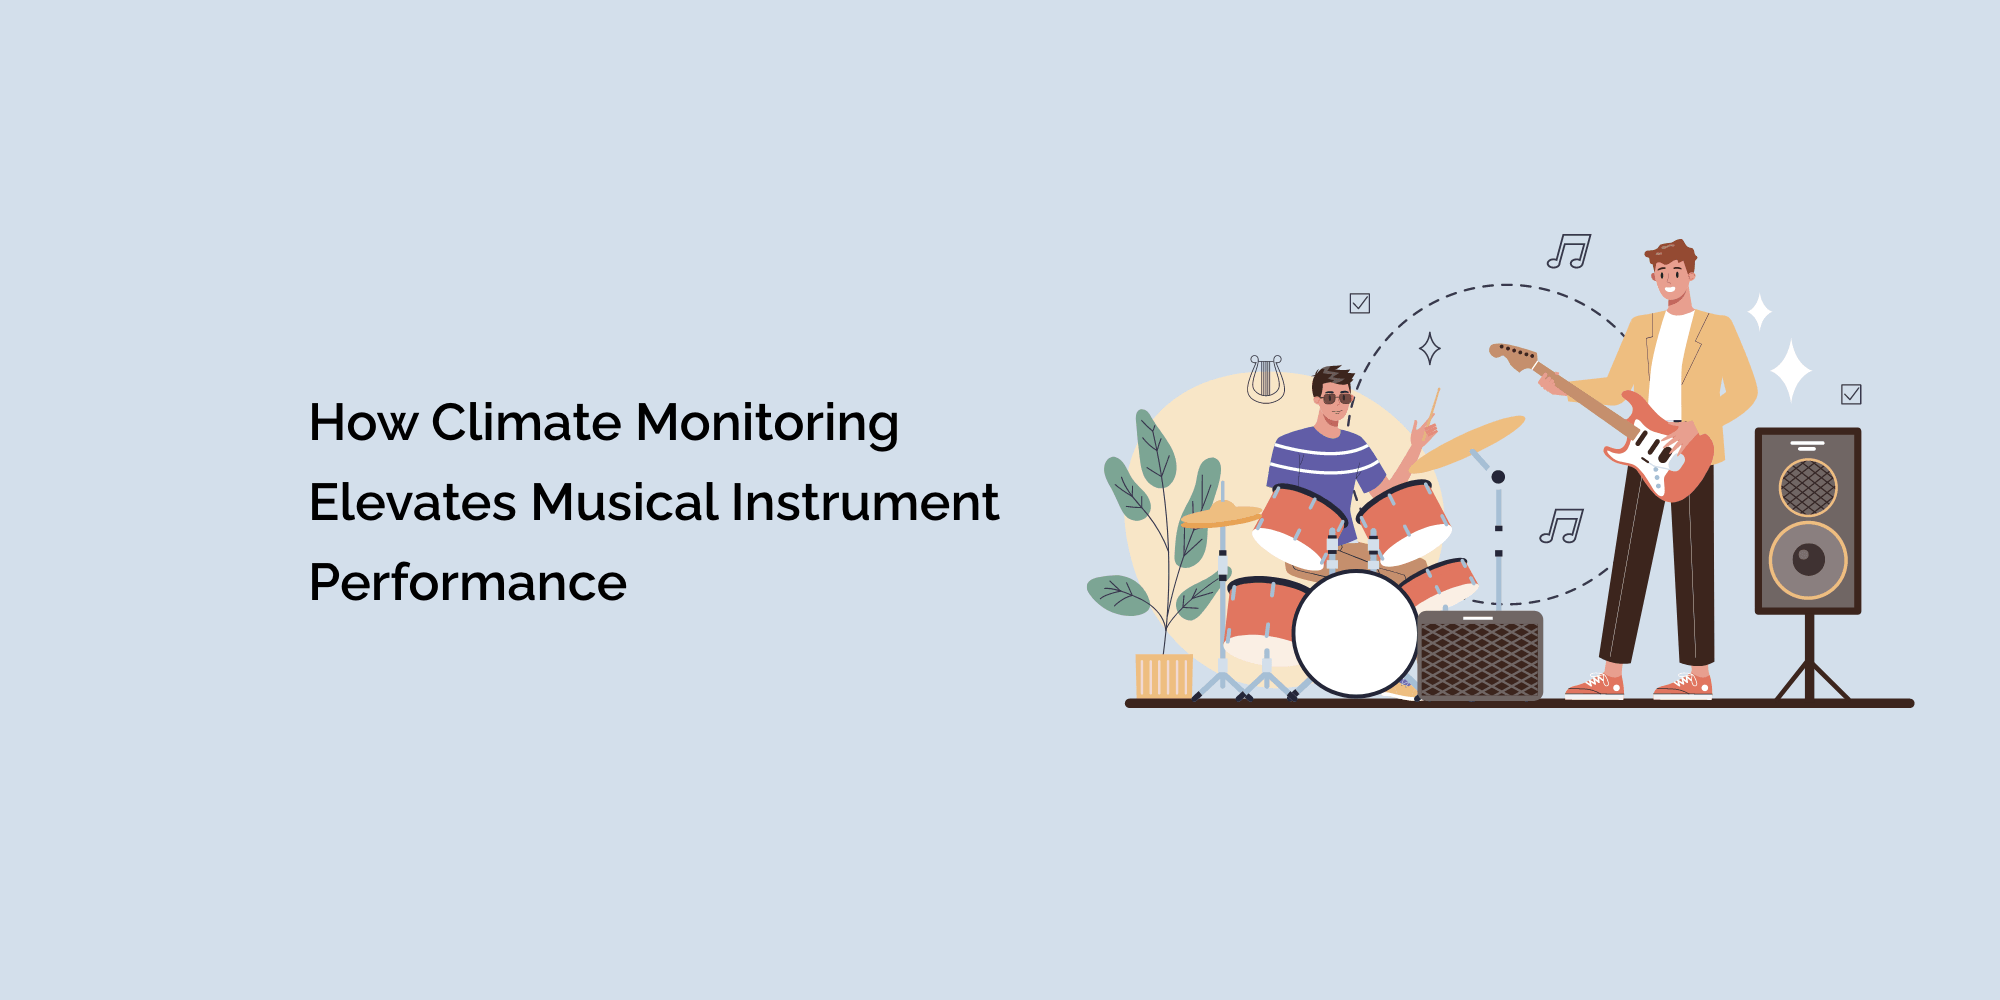 How Climate Monitoring Elevates Musical Instrument Performance